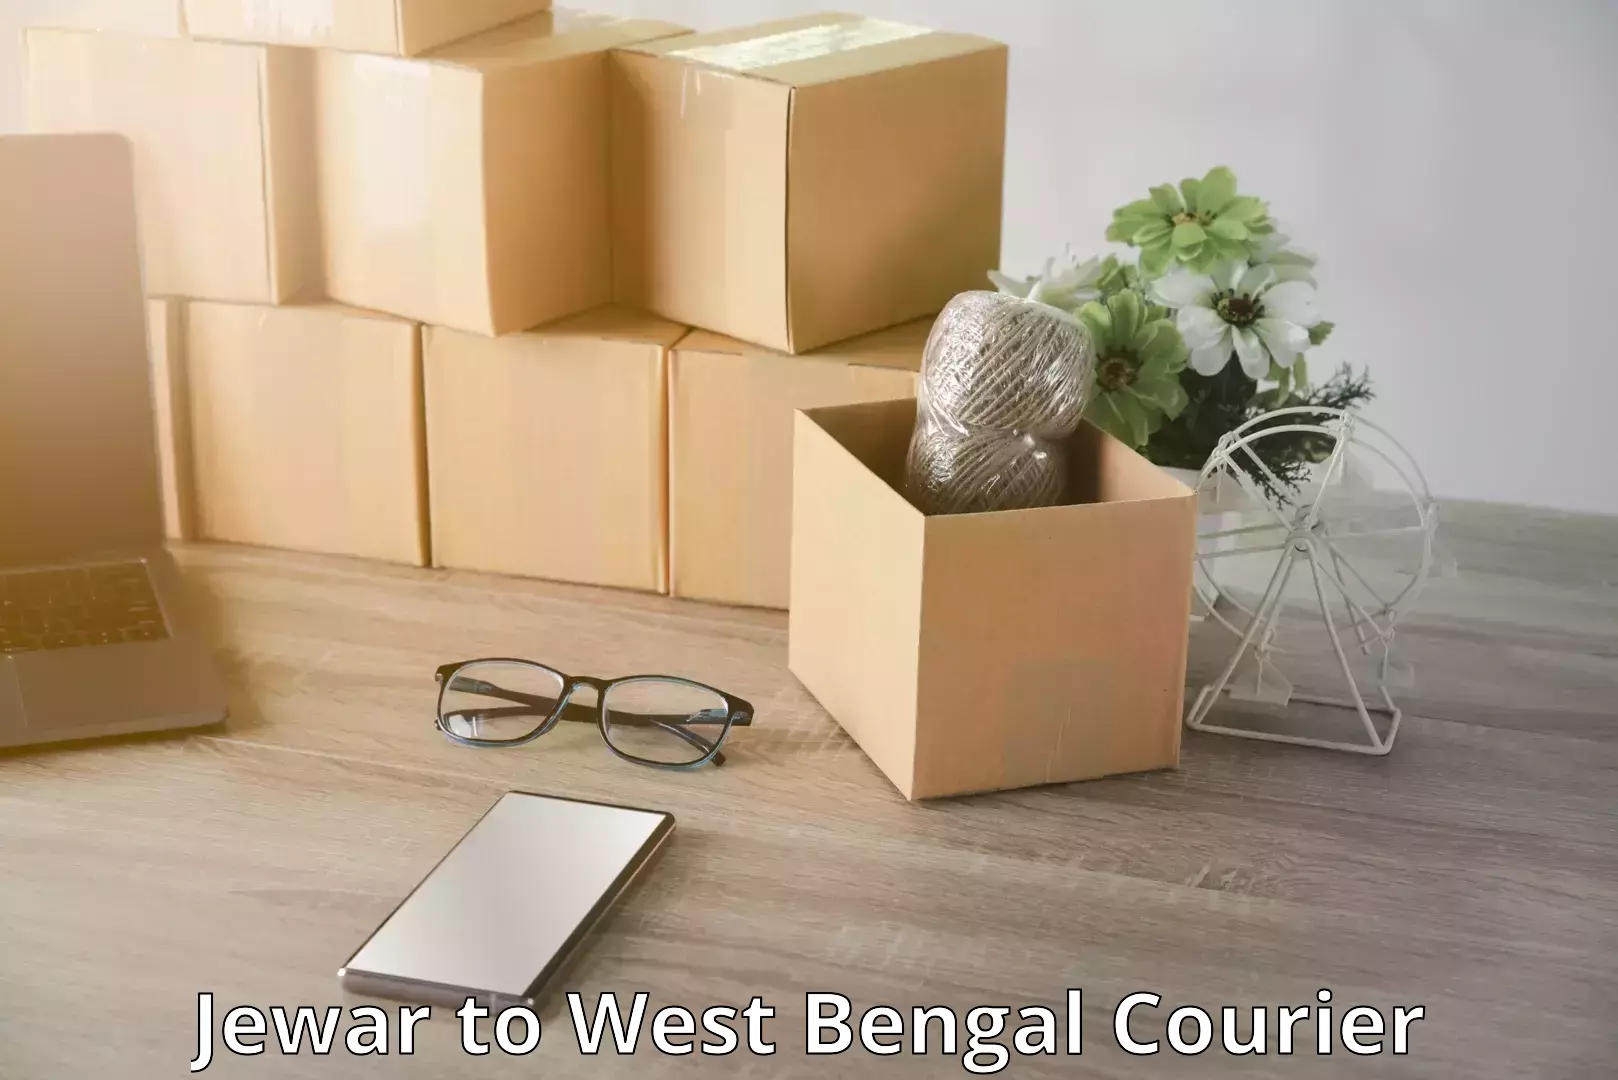 Luggage transport consultancy Jewar to West Bengal